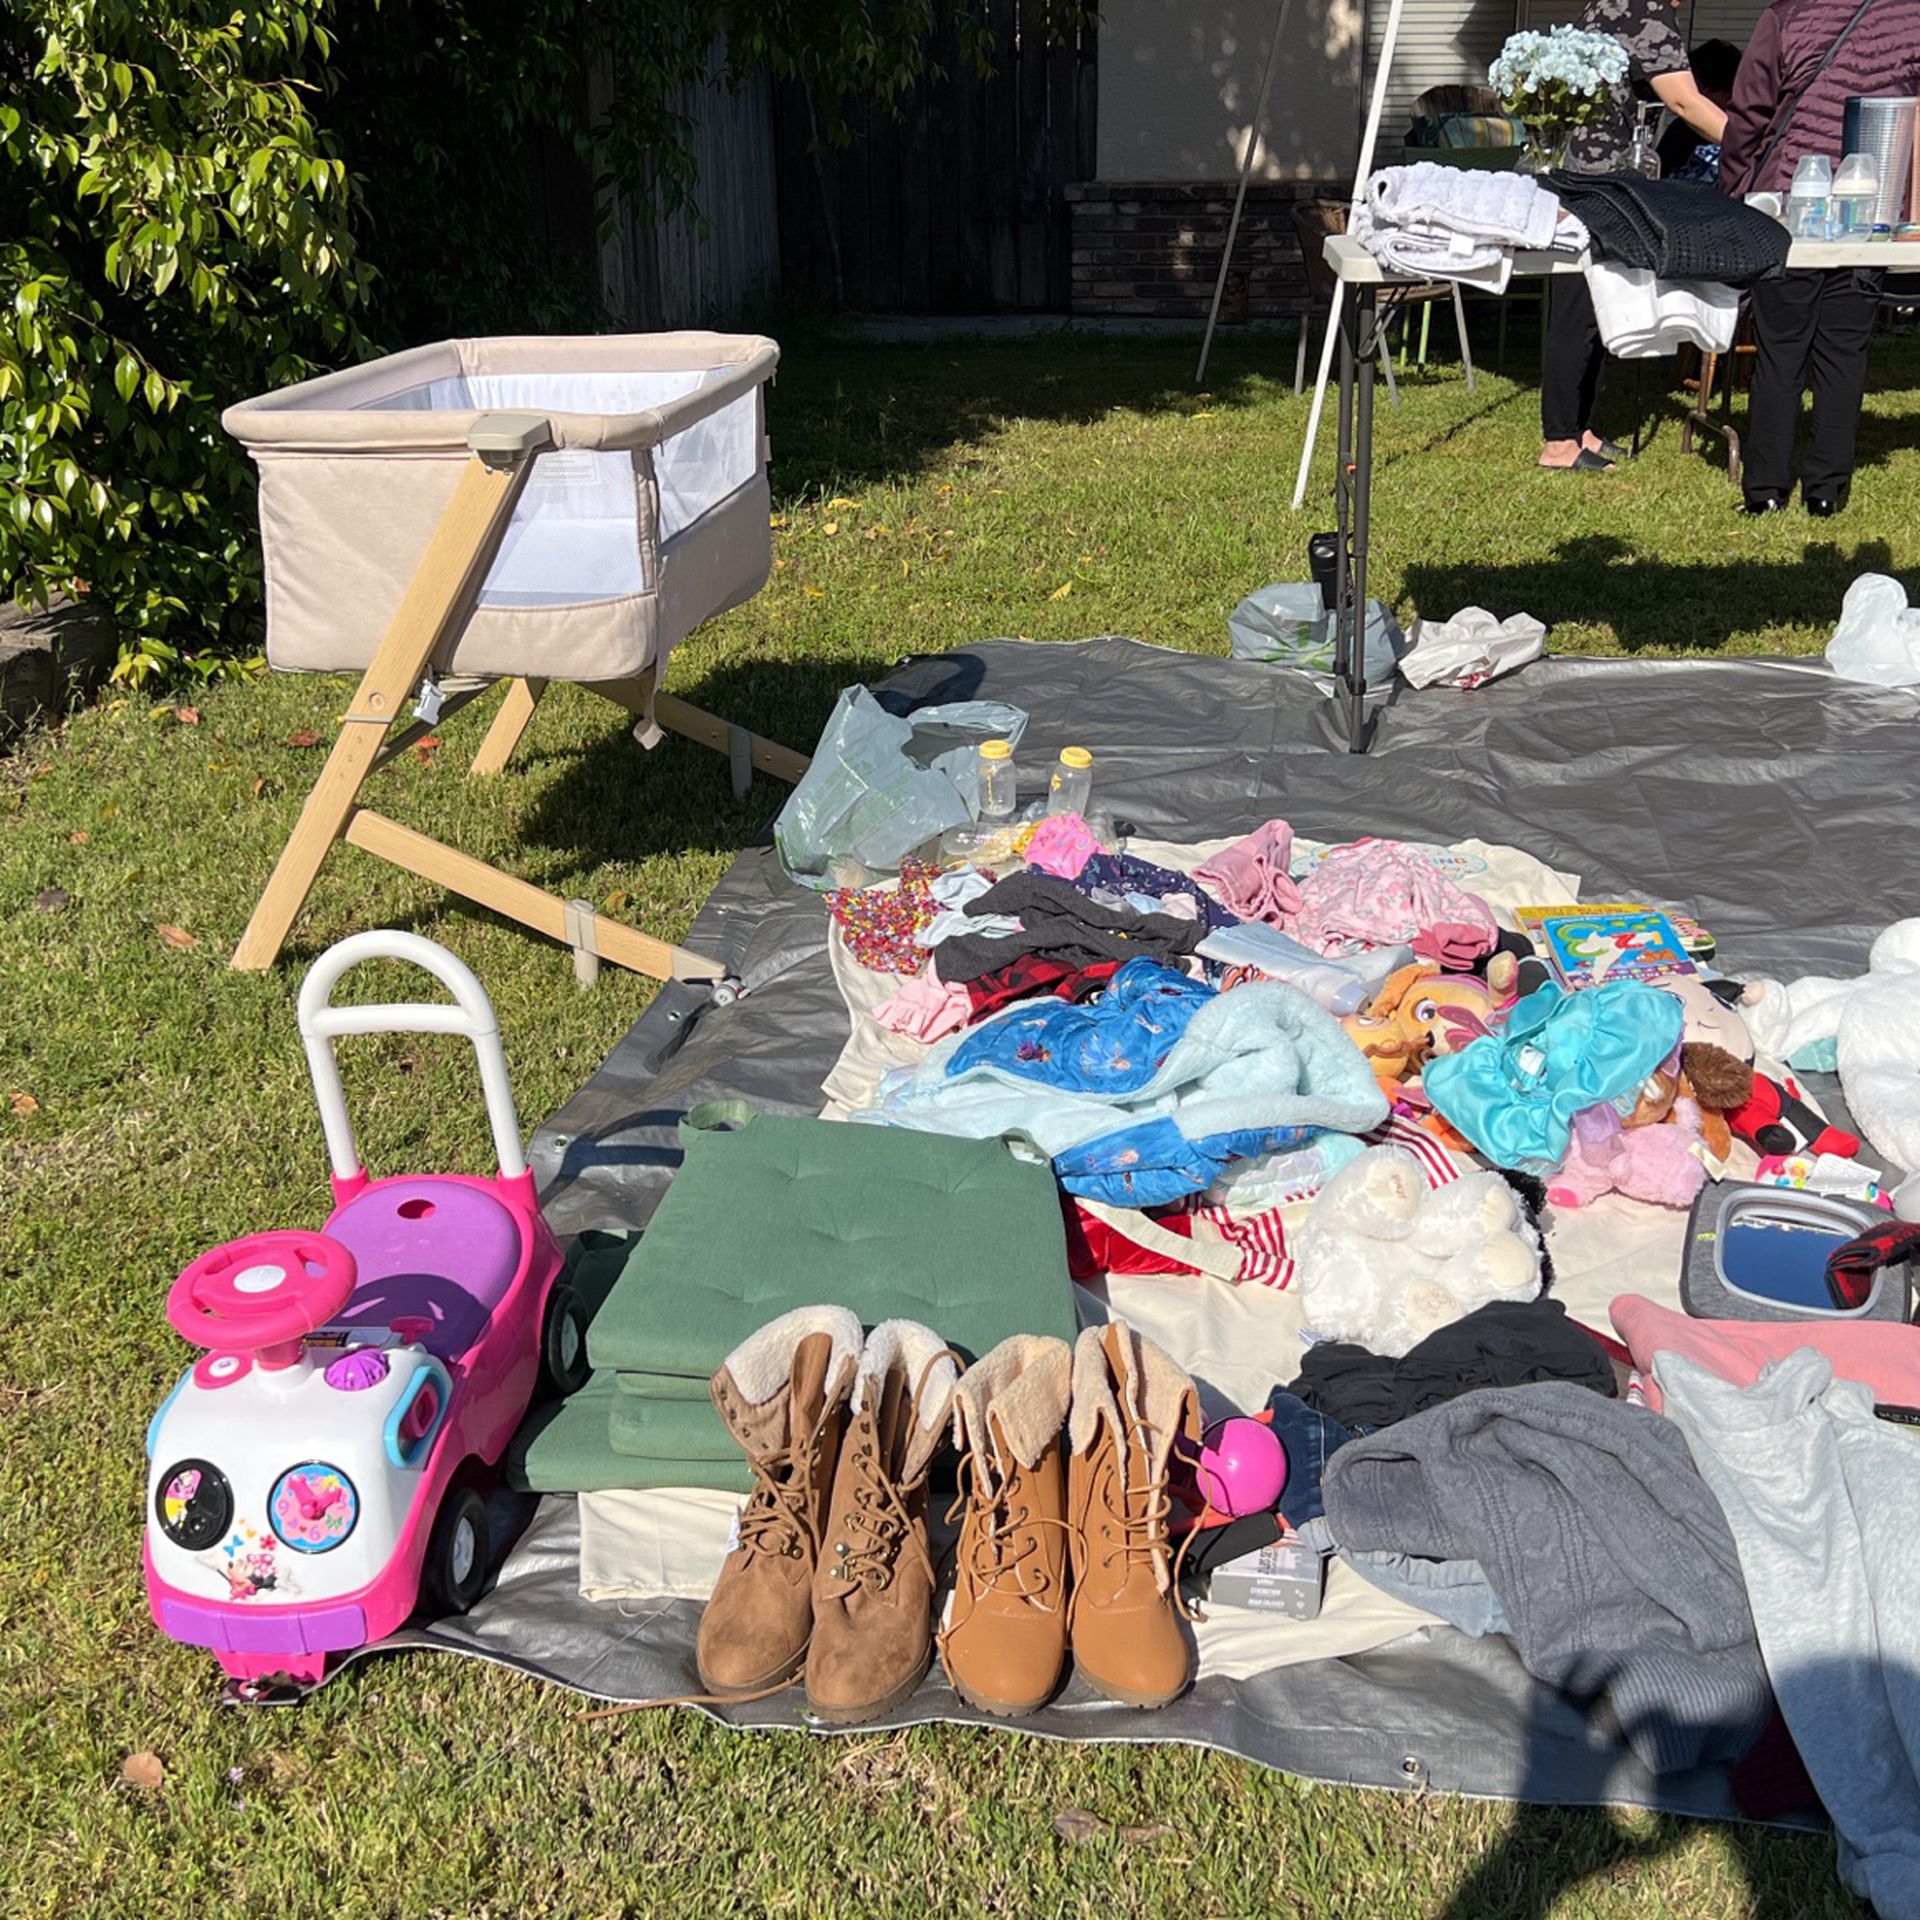 Clothes, toys and baby items